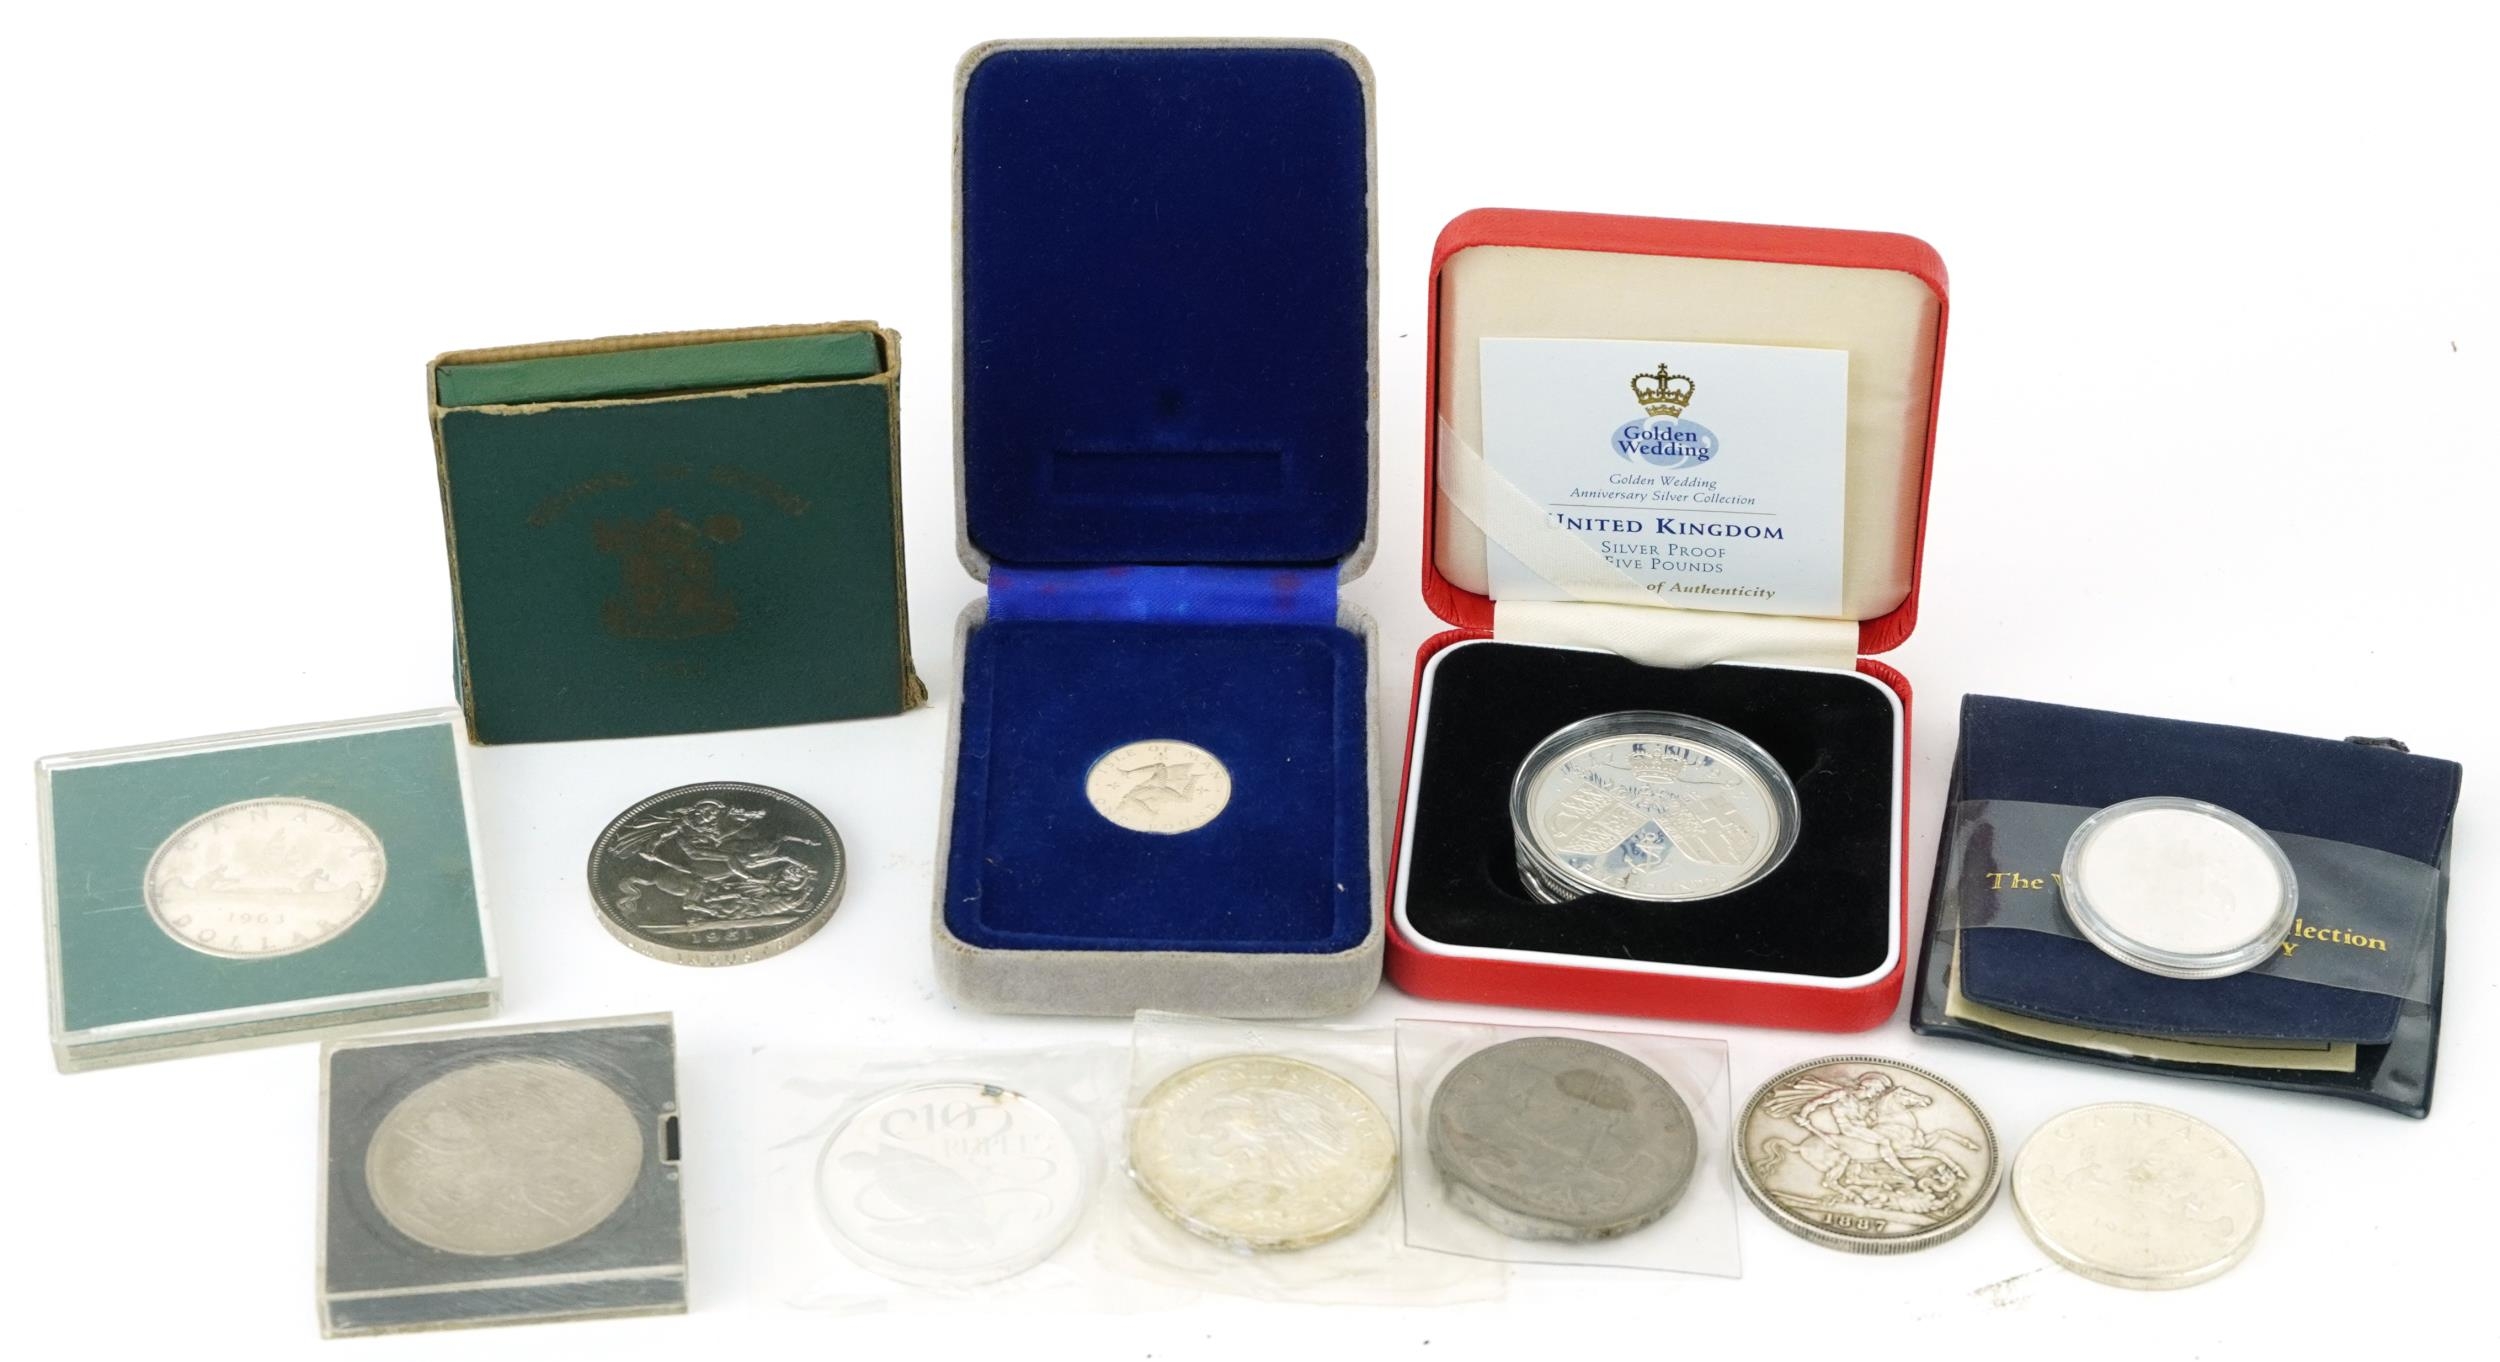 Victorian 1887 silver crown, Isle of Man one pound, Golden Wedding silver proof five pound, two